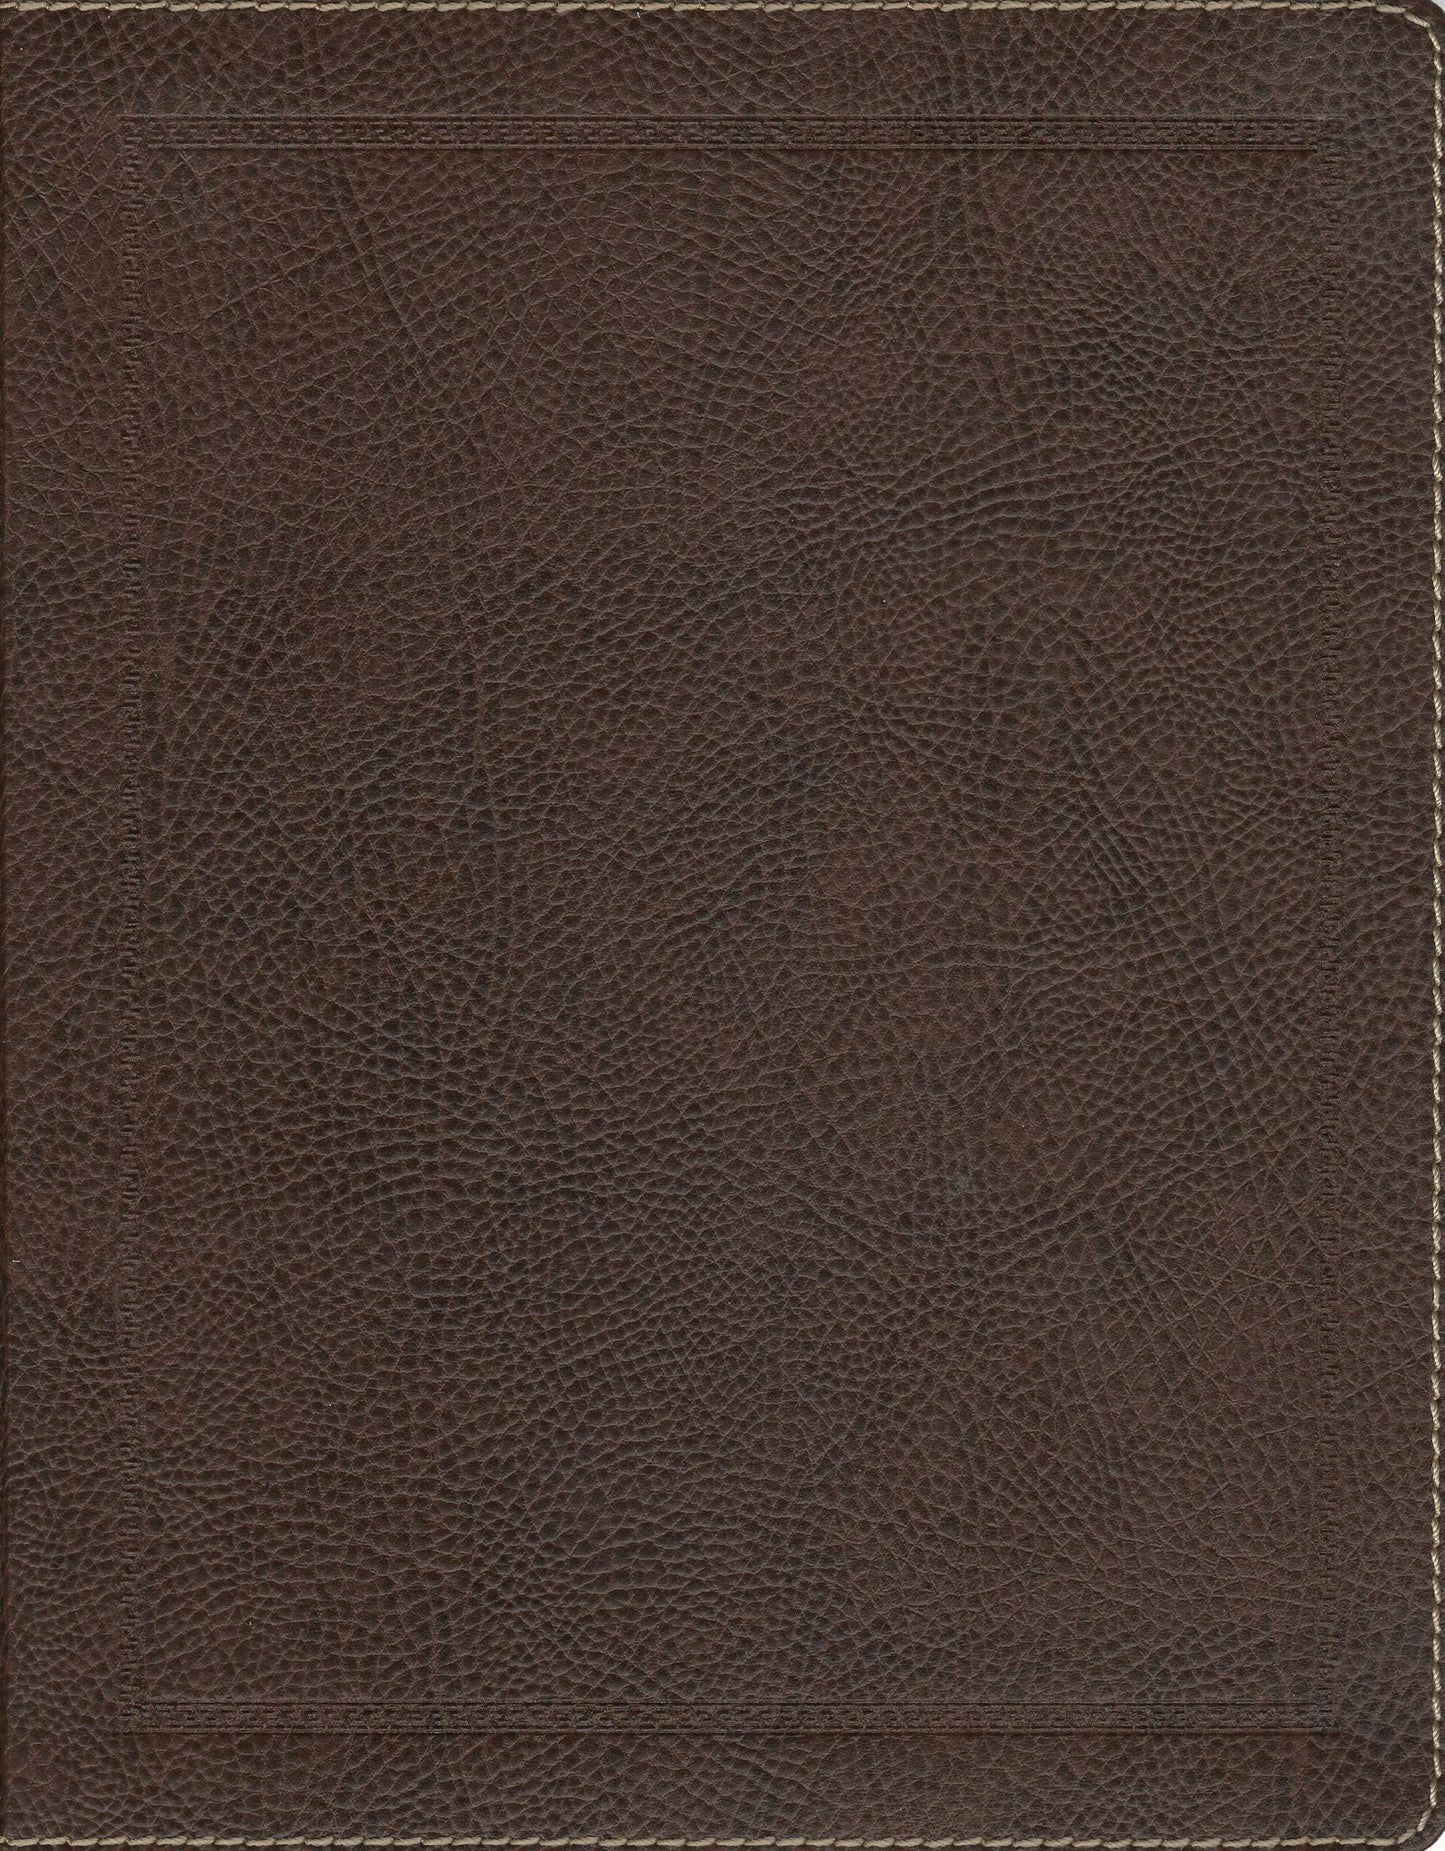 Thomas Nelson NKJV® Journal the Word™ Bible Large Print - Bonded Leather (Brown)